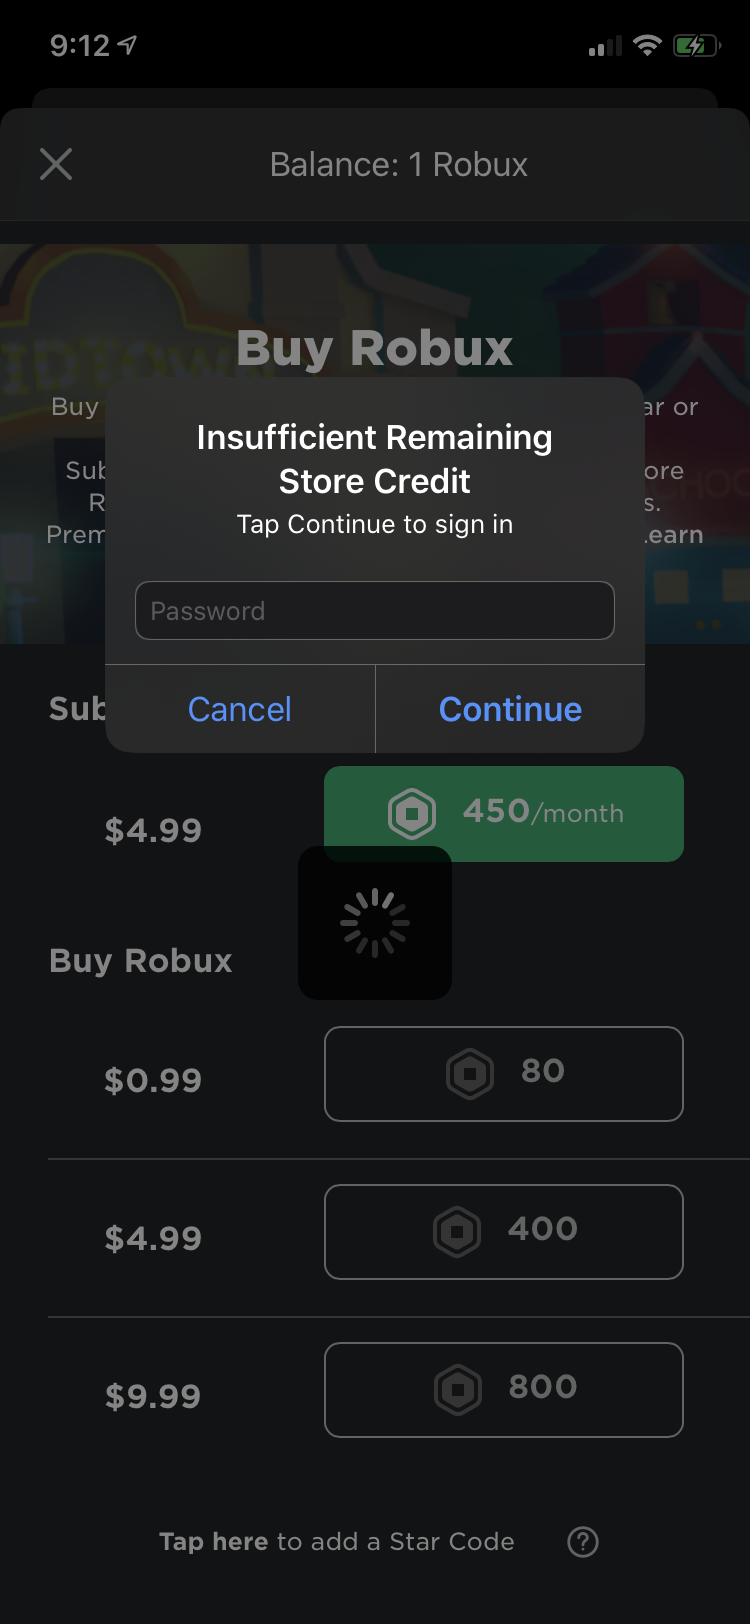 Insufficient Funds Itunes Apple Community - how to purchase robux with itunes gift card